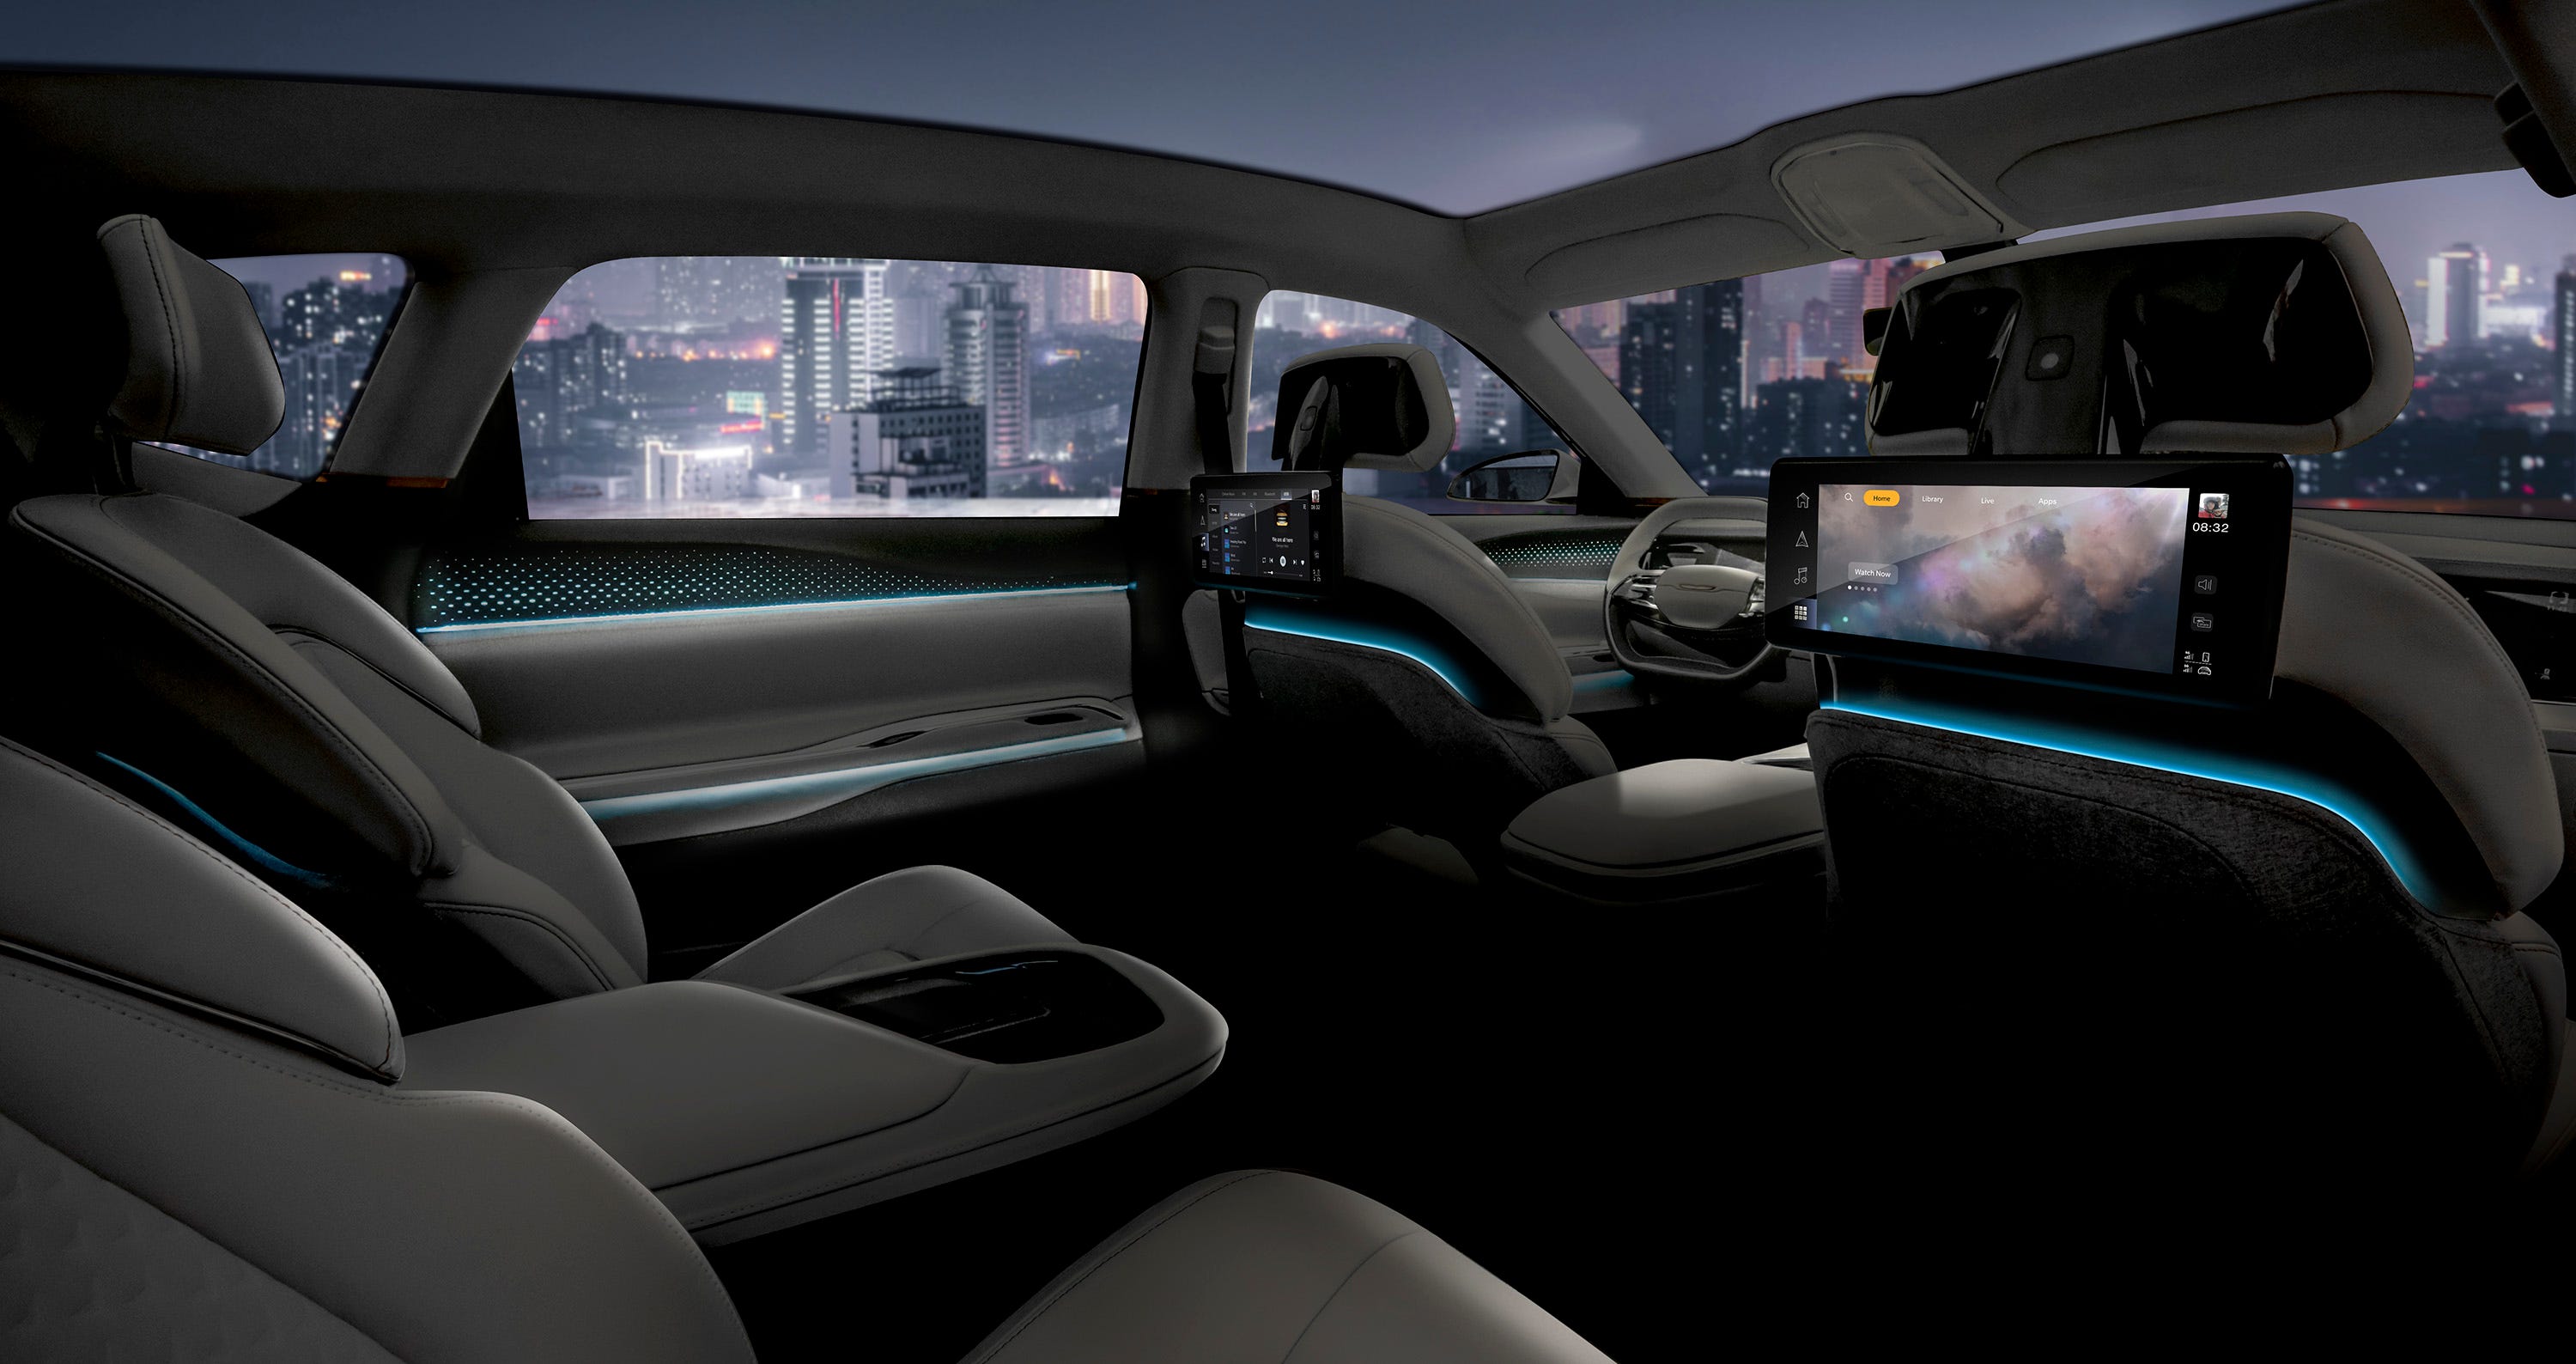 Ambient lighting in the Chrysler Airflow Concept reveals itself in direct lines, adding modernity, and syncs to the mood of the interior and changes based on the passengers’ preferences and the content on the displays.